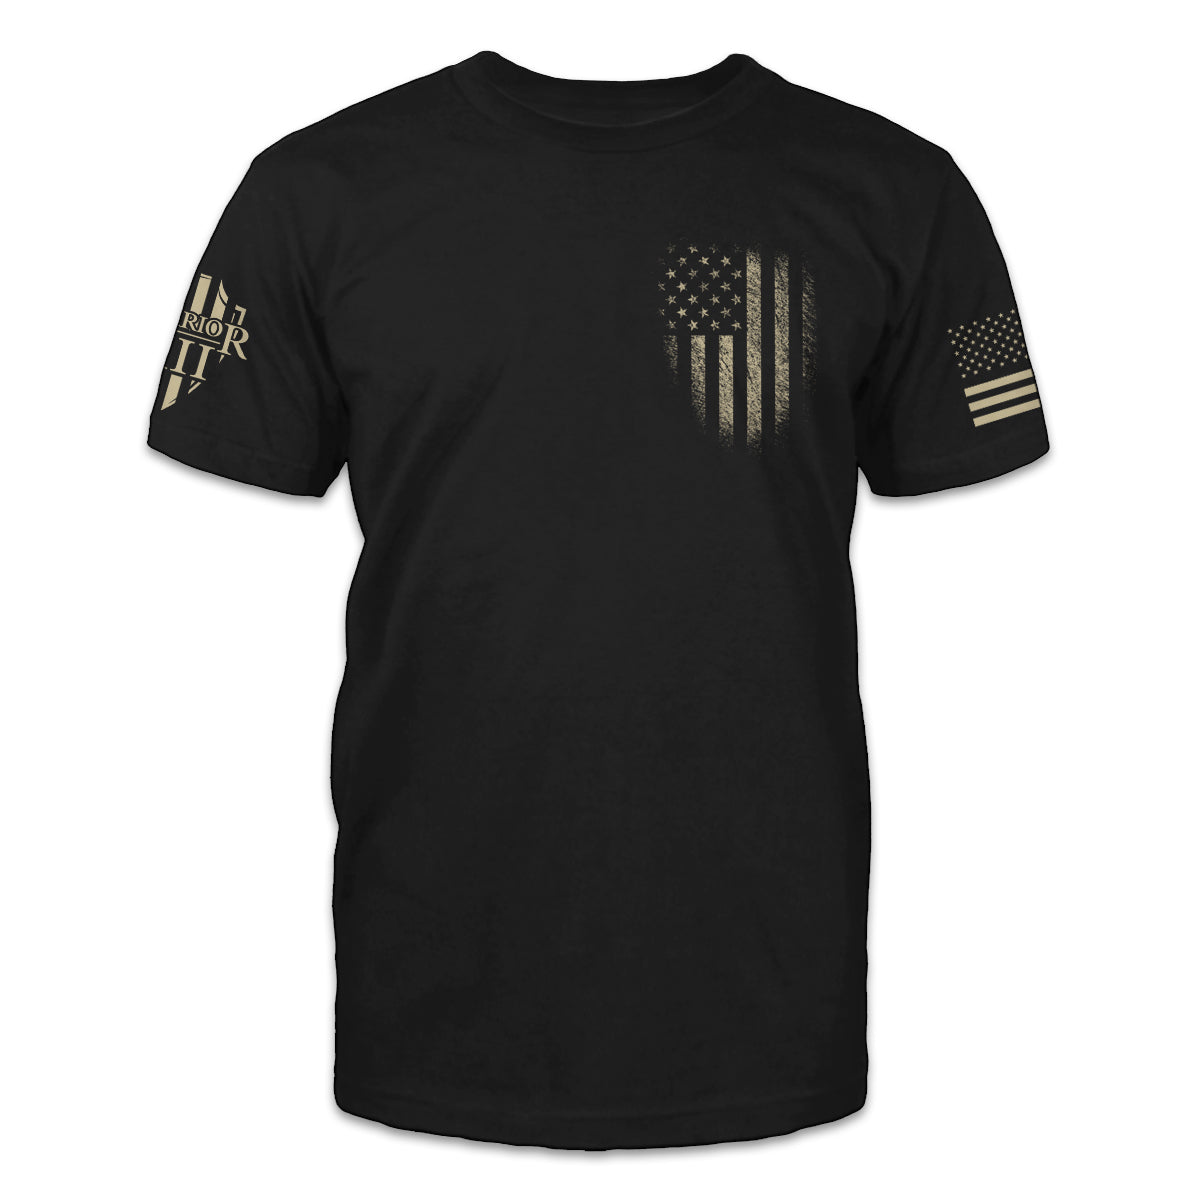 A black t-shirt with a USA flag emblem printed on the front of the shirt.